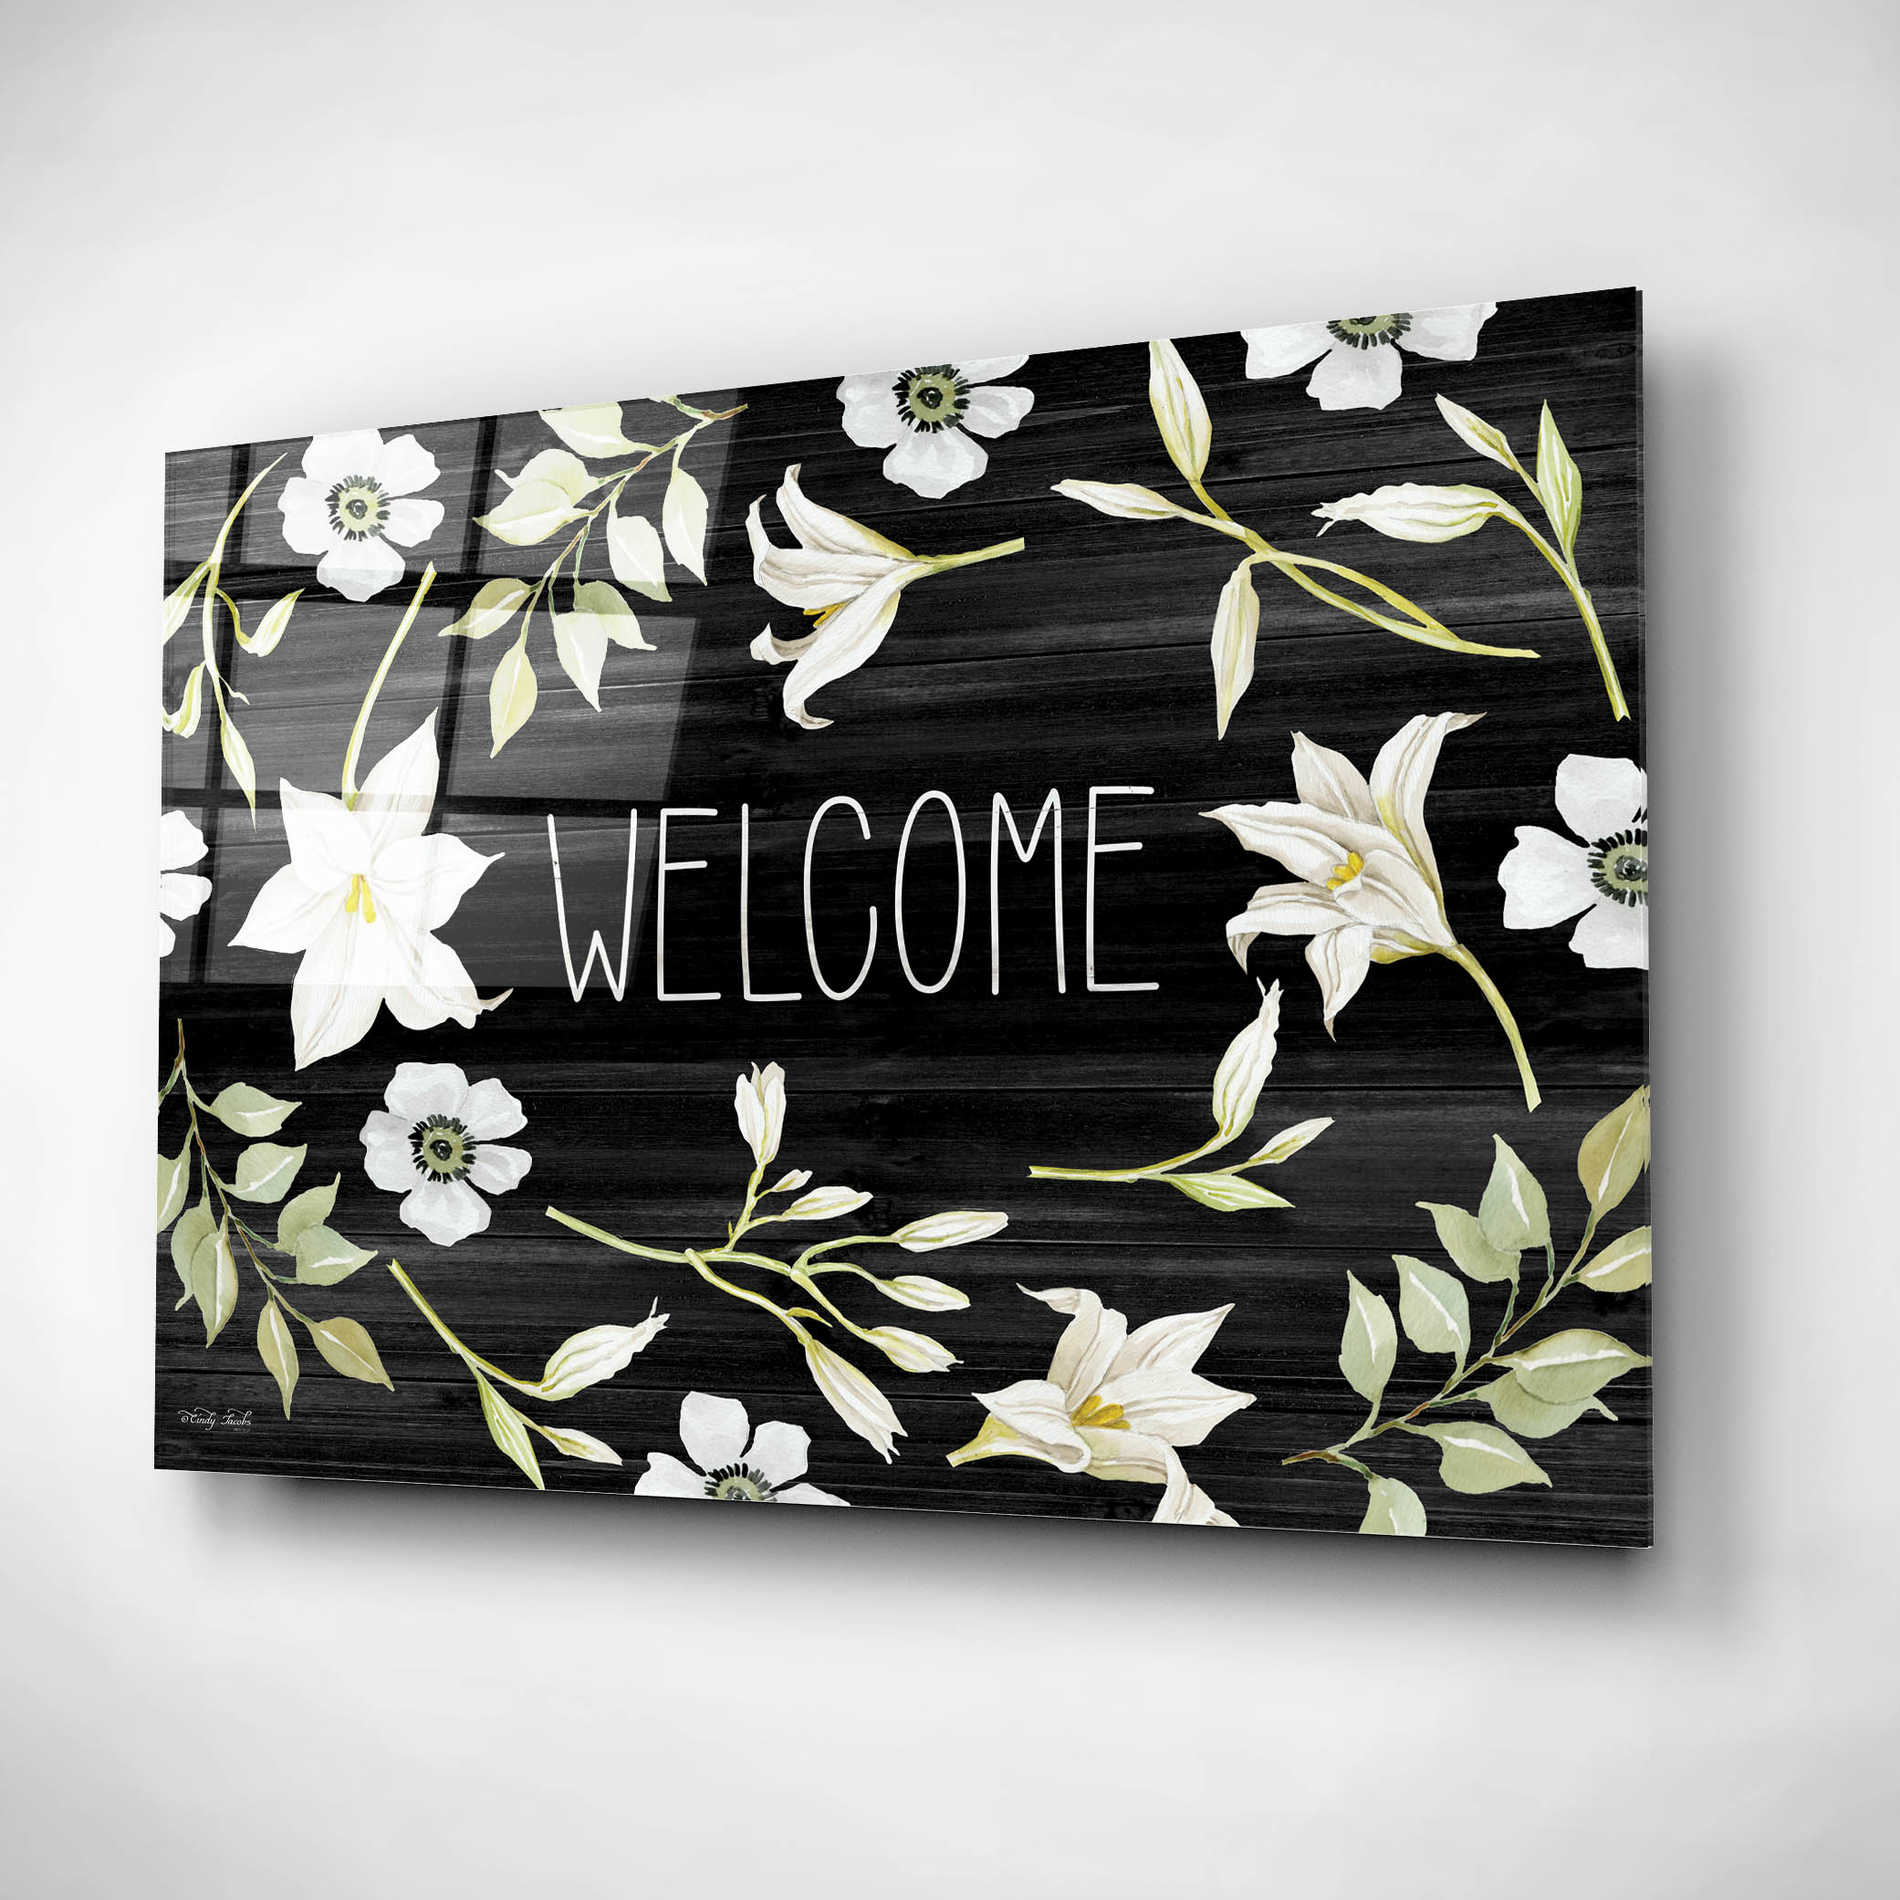 Epic Art 'Welcome Lilies' by Cindy Jacobs, Acrylic Glass Wall Art,16x12